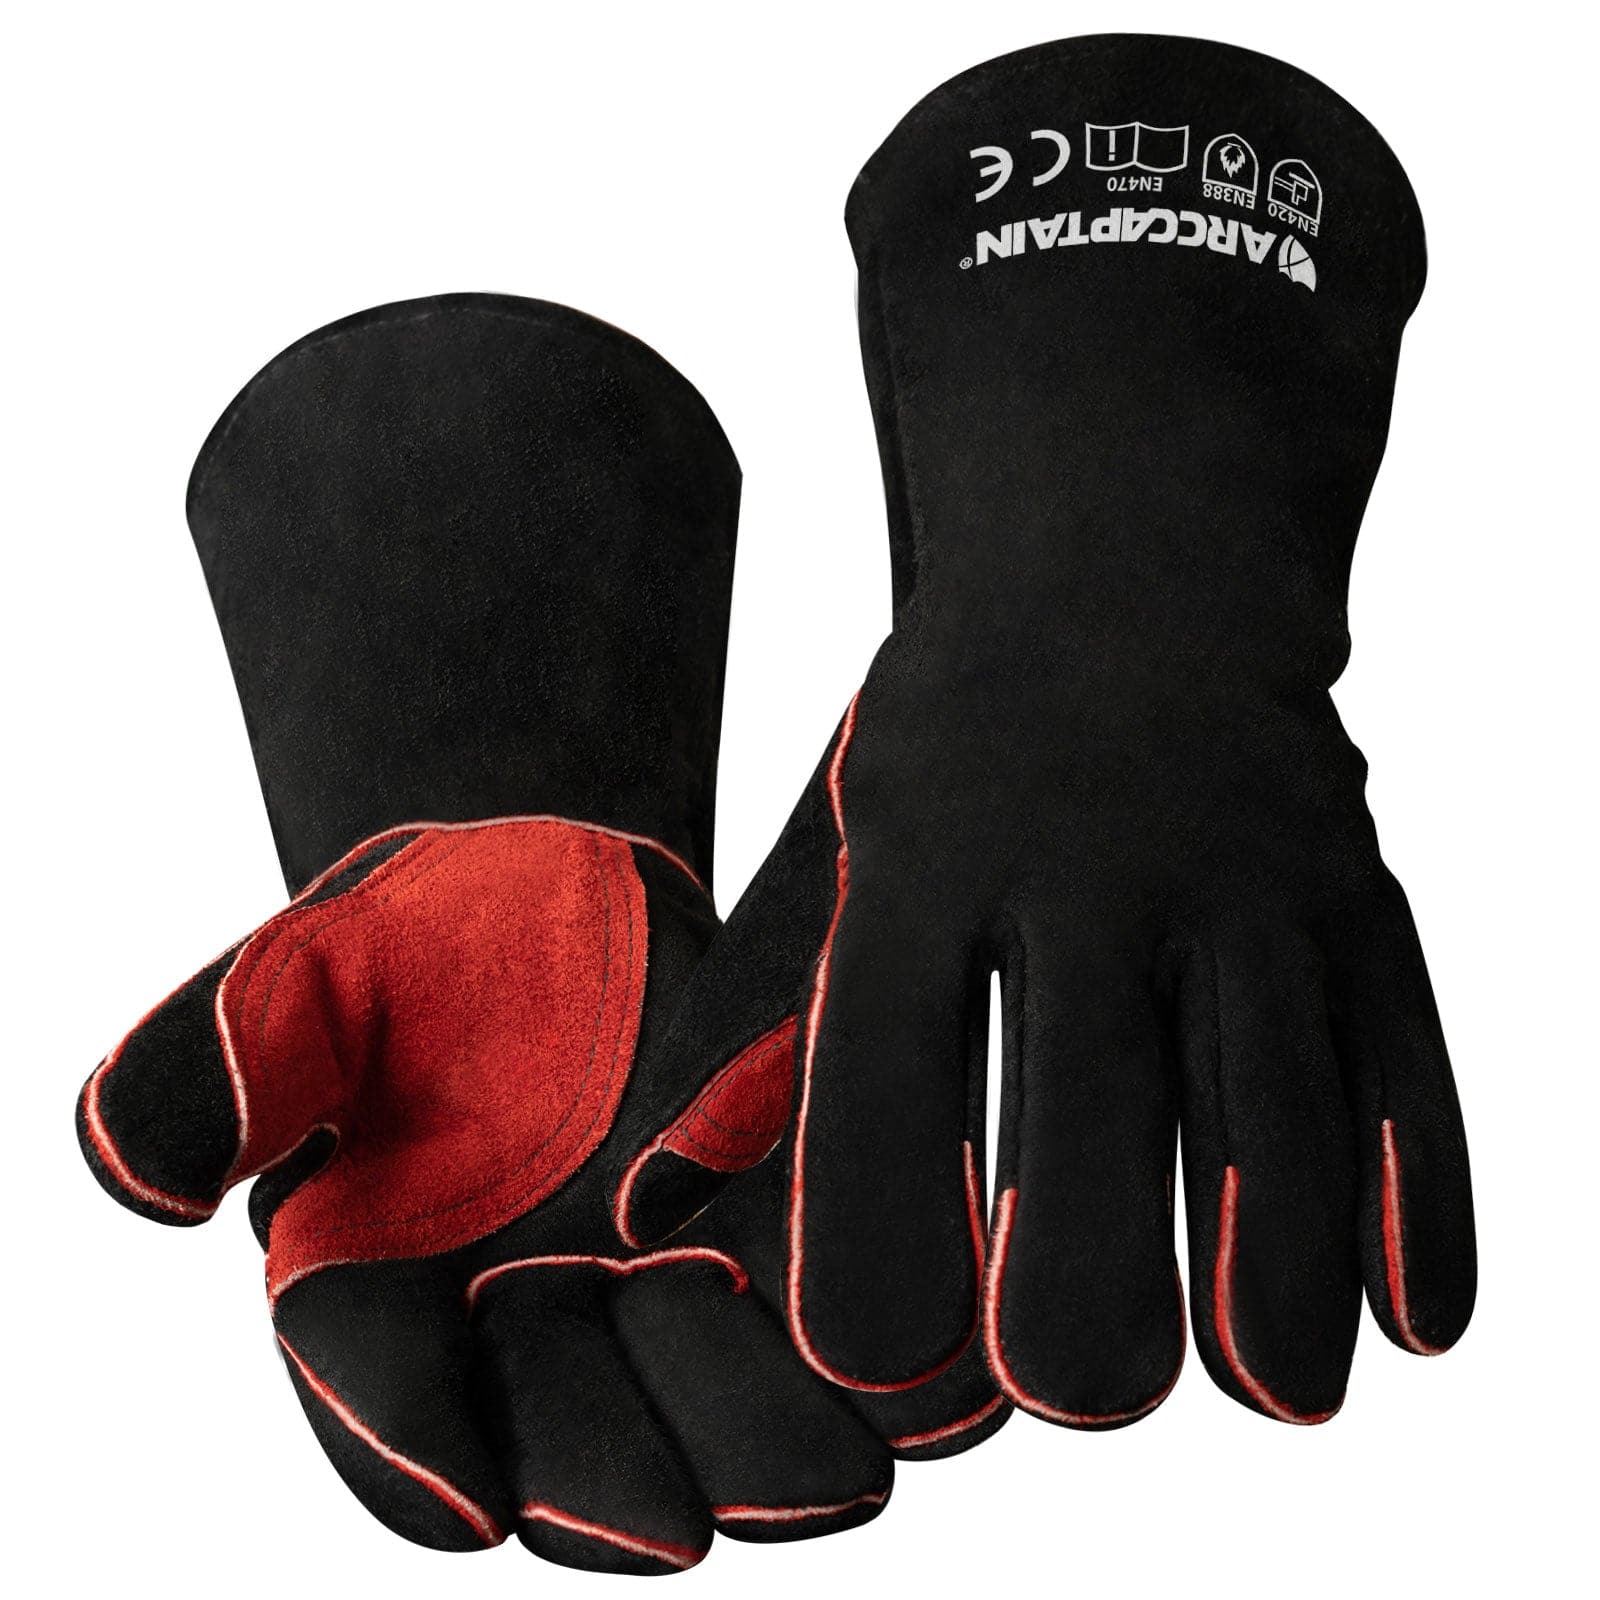 ARCCAPTAIN 16 inches Multifunction Cowhide Leather Welding Gloves